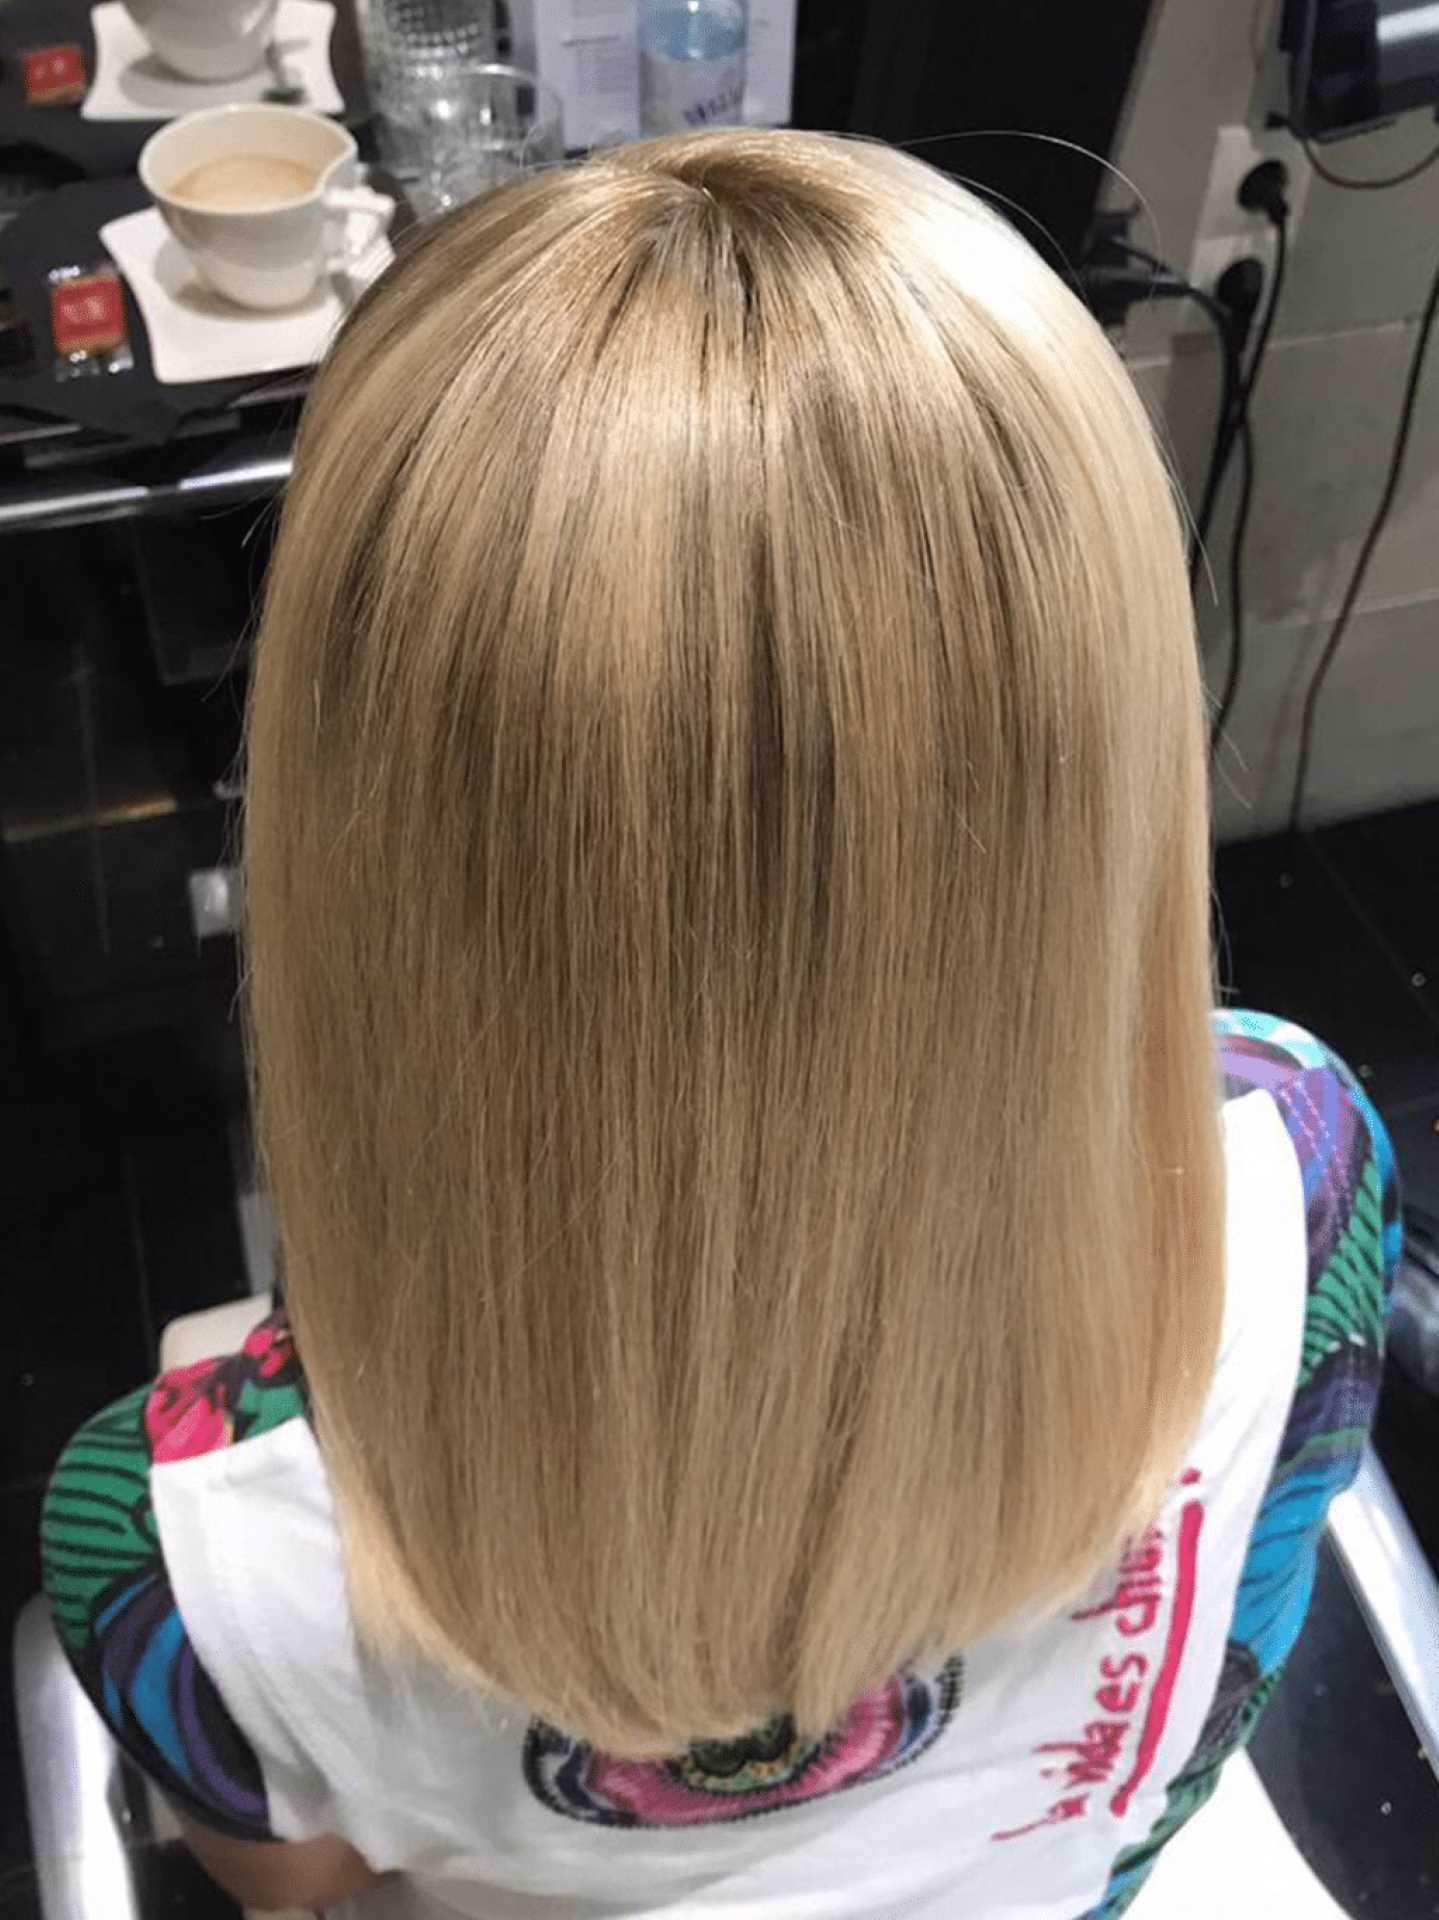 After hair thickening on woman with blond hair